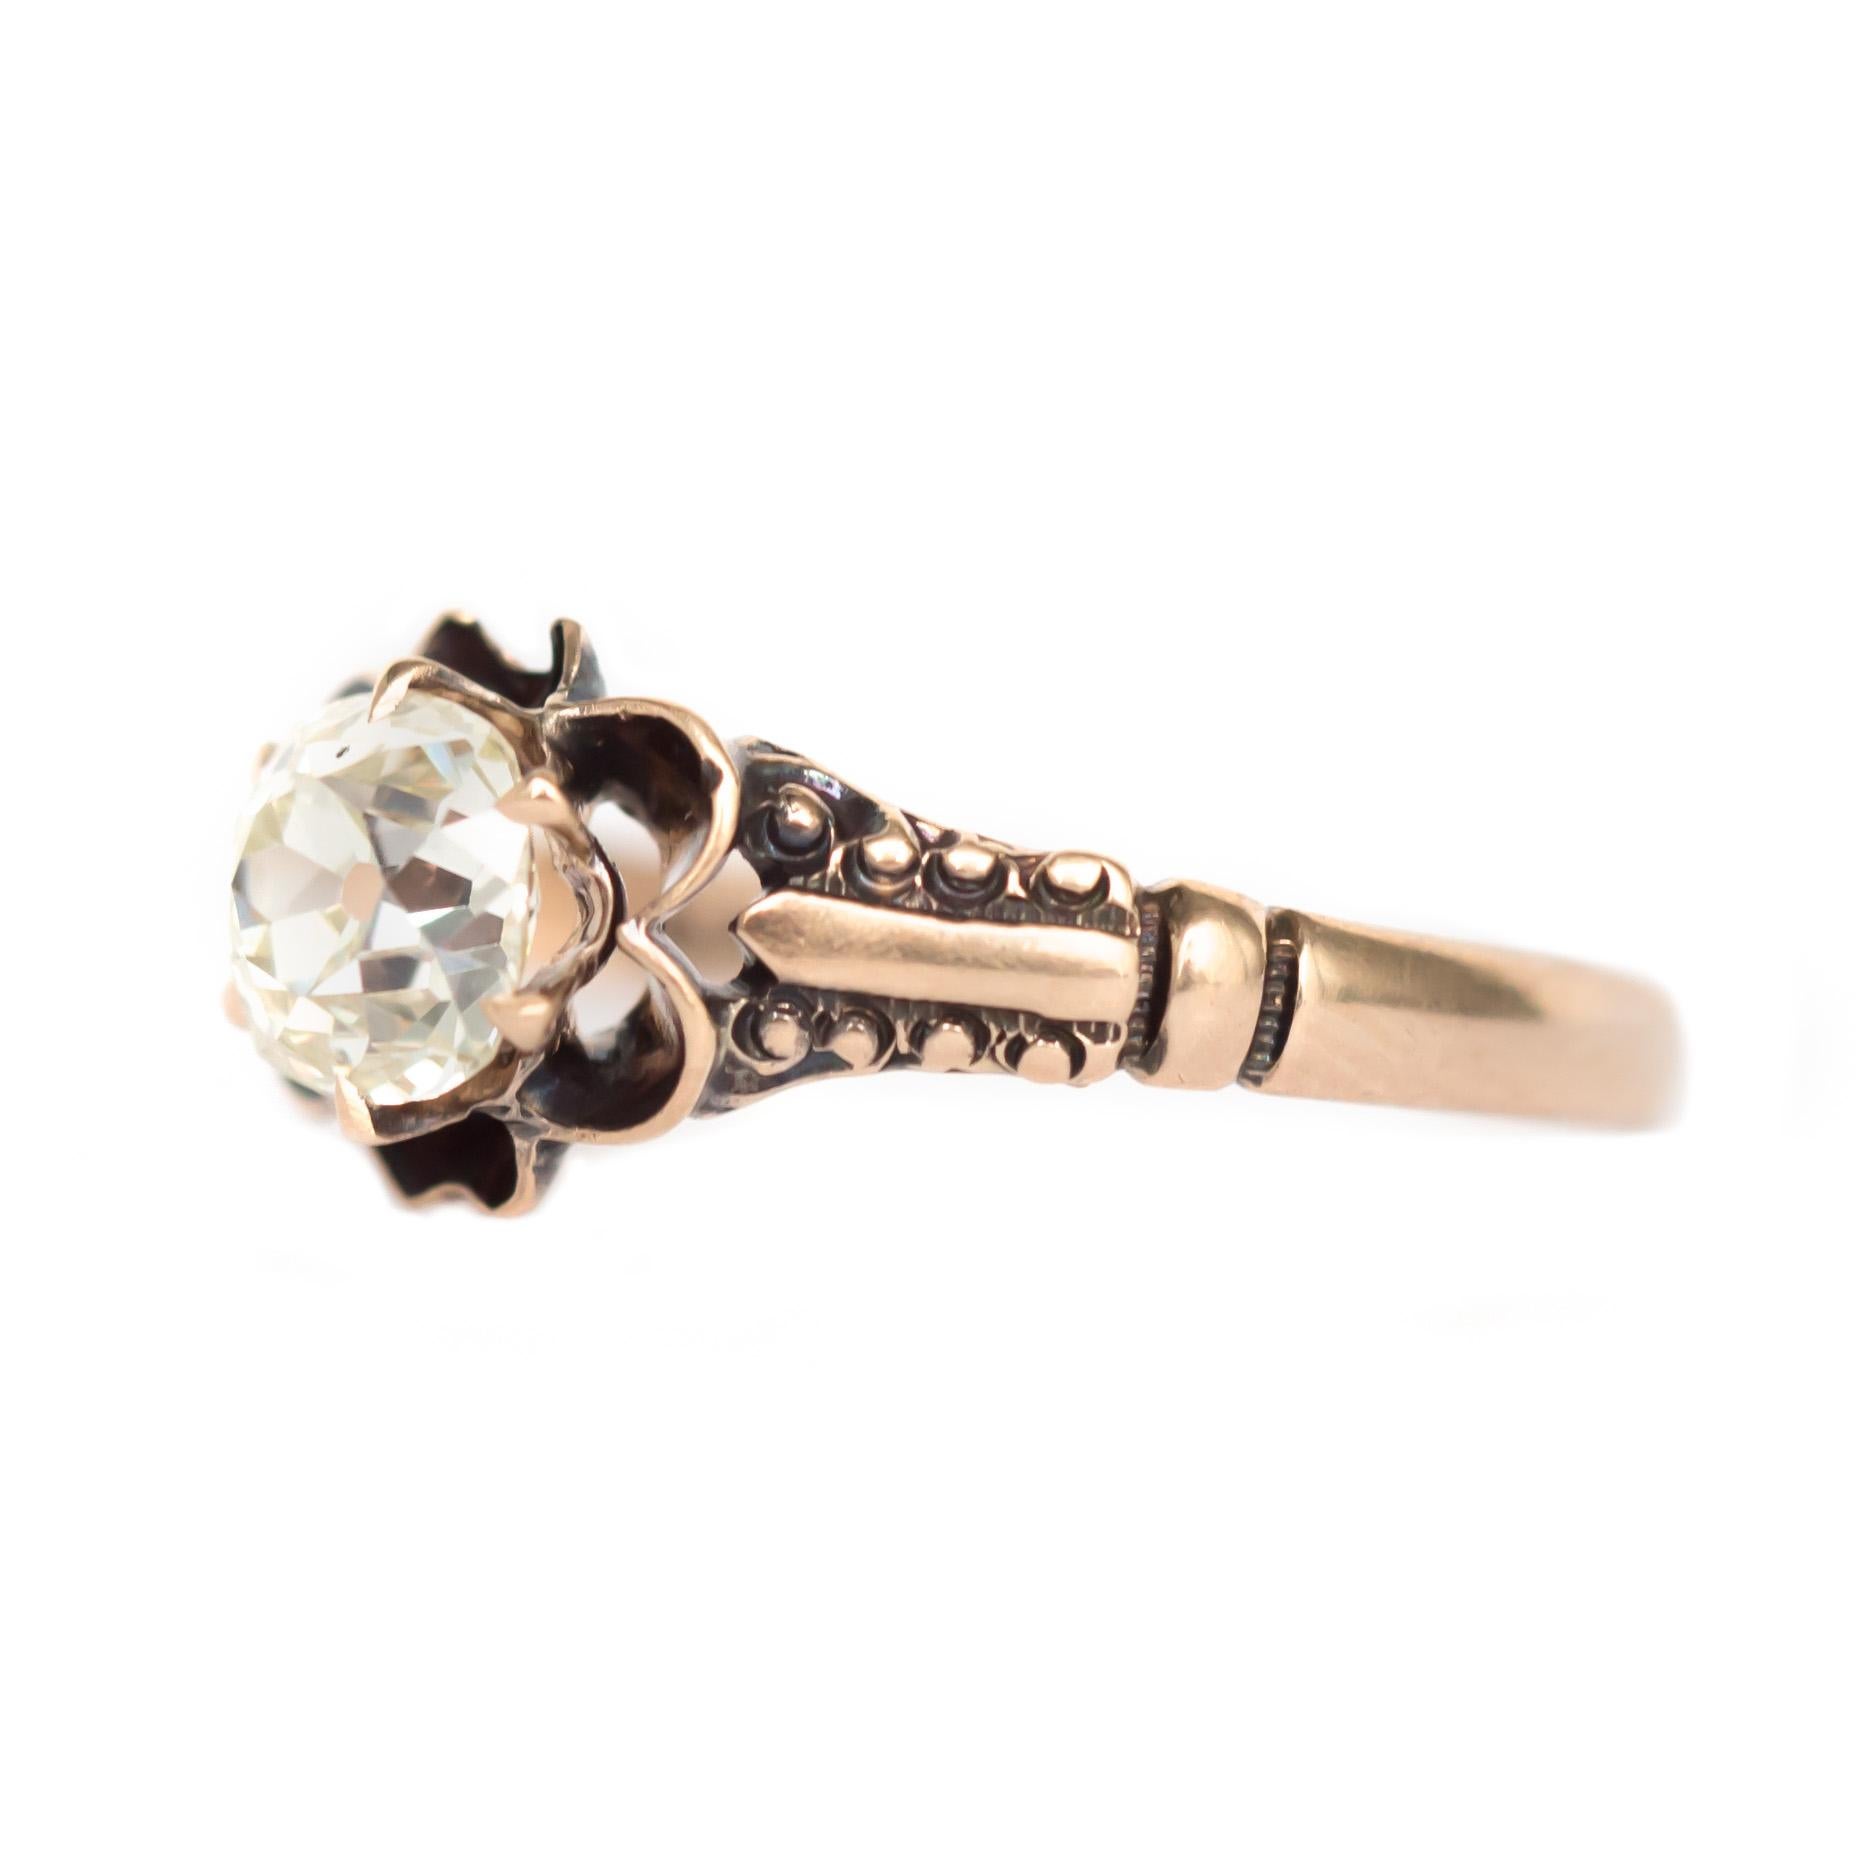 Item Details: 
Ring Size: 7.25
Metal Type: 9 Karat Yellow Gold 
Weight: 2.0 grams

Center Diamond Details
Shape: Antique Cushion
Carat Weight: .86 carat
Color: J
Clarity: VS1

Finger to Top of Stone Measurement: 3.53mm